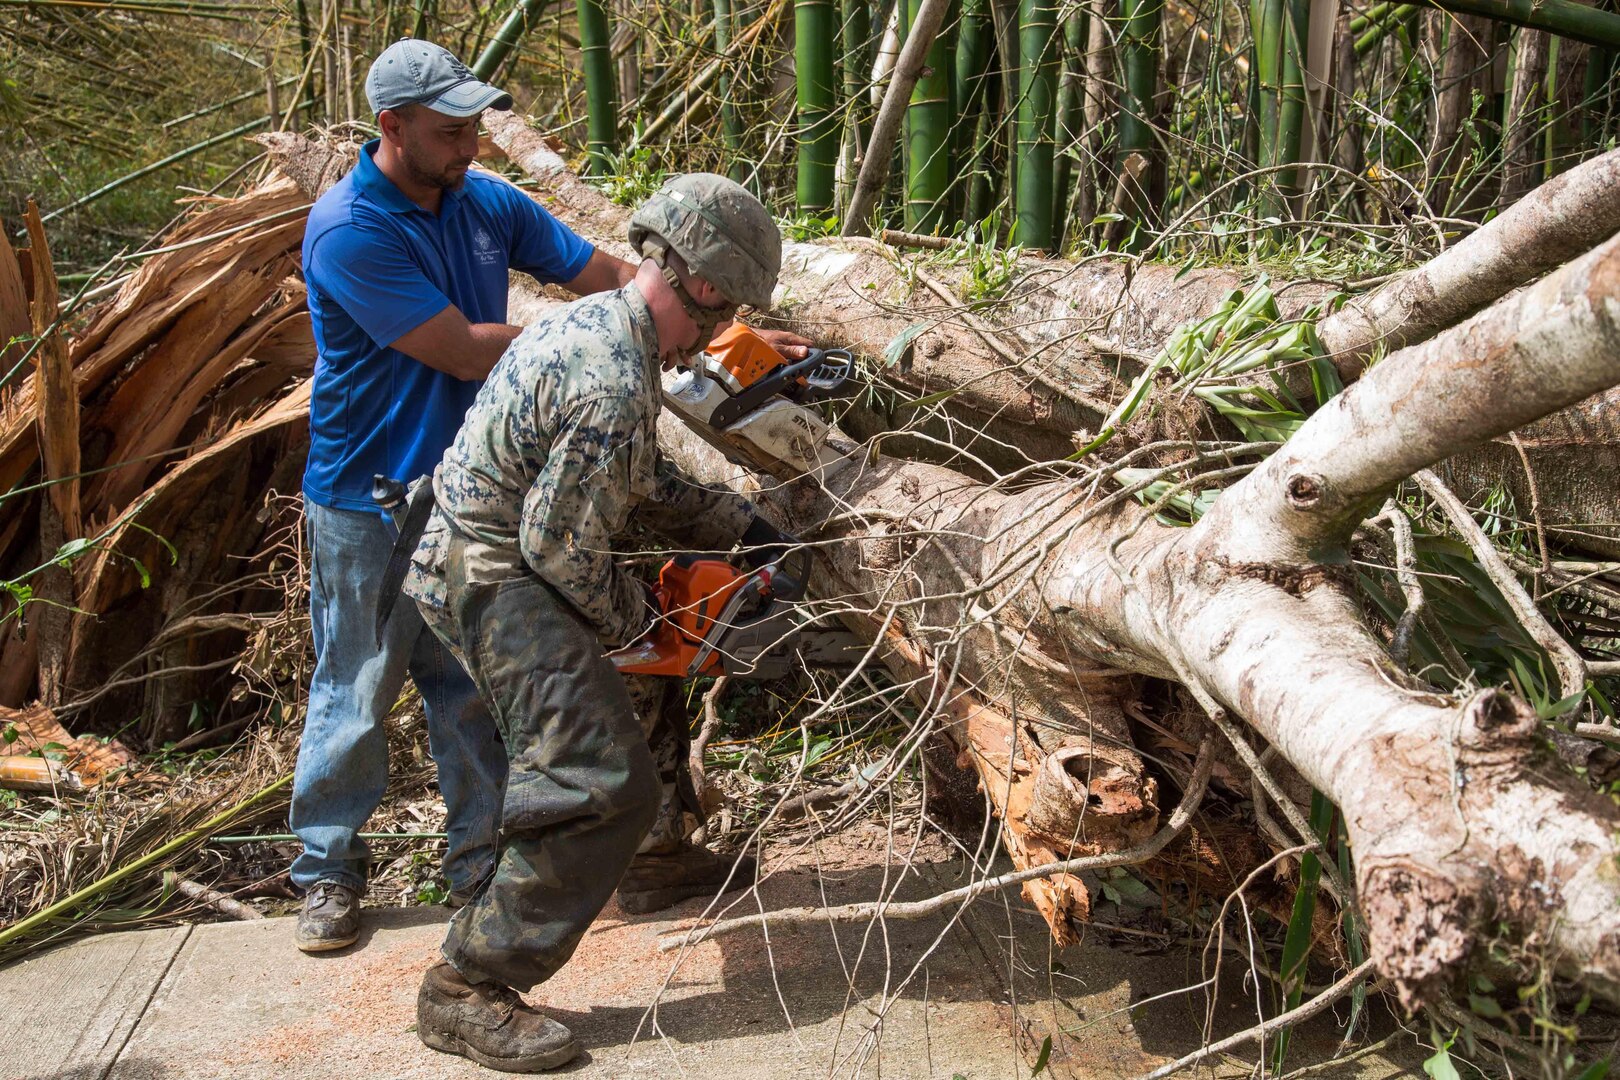 A Marine and resident work together to clear the main road.